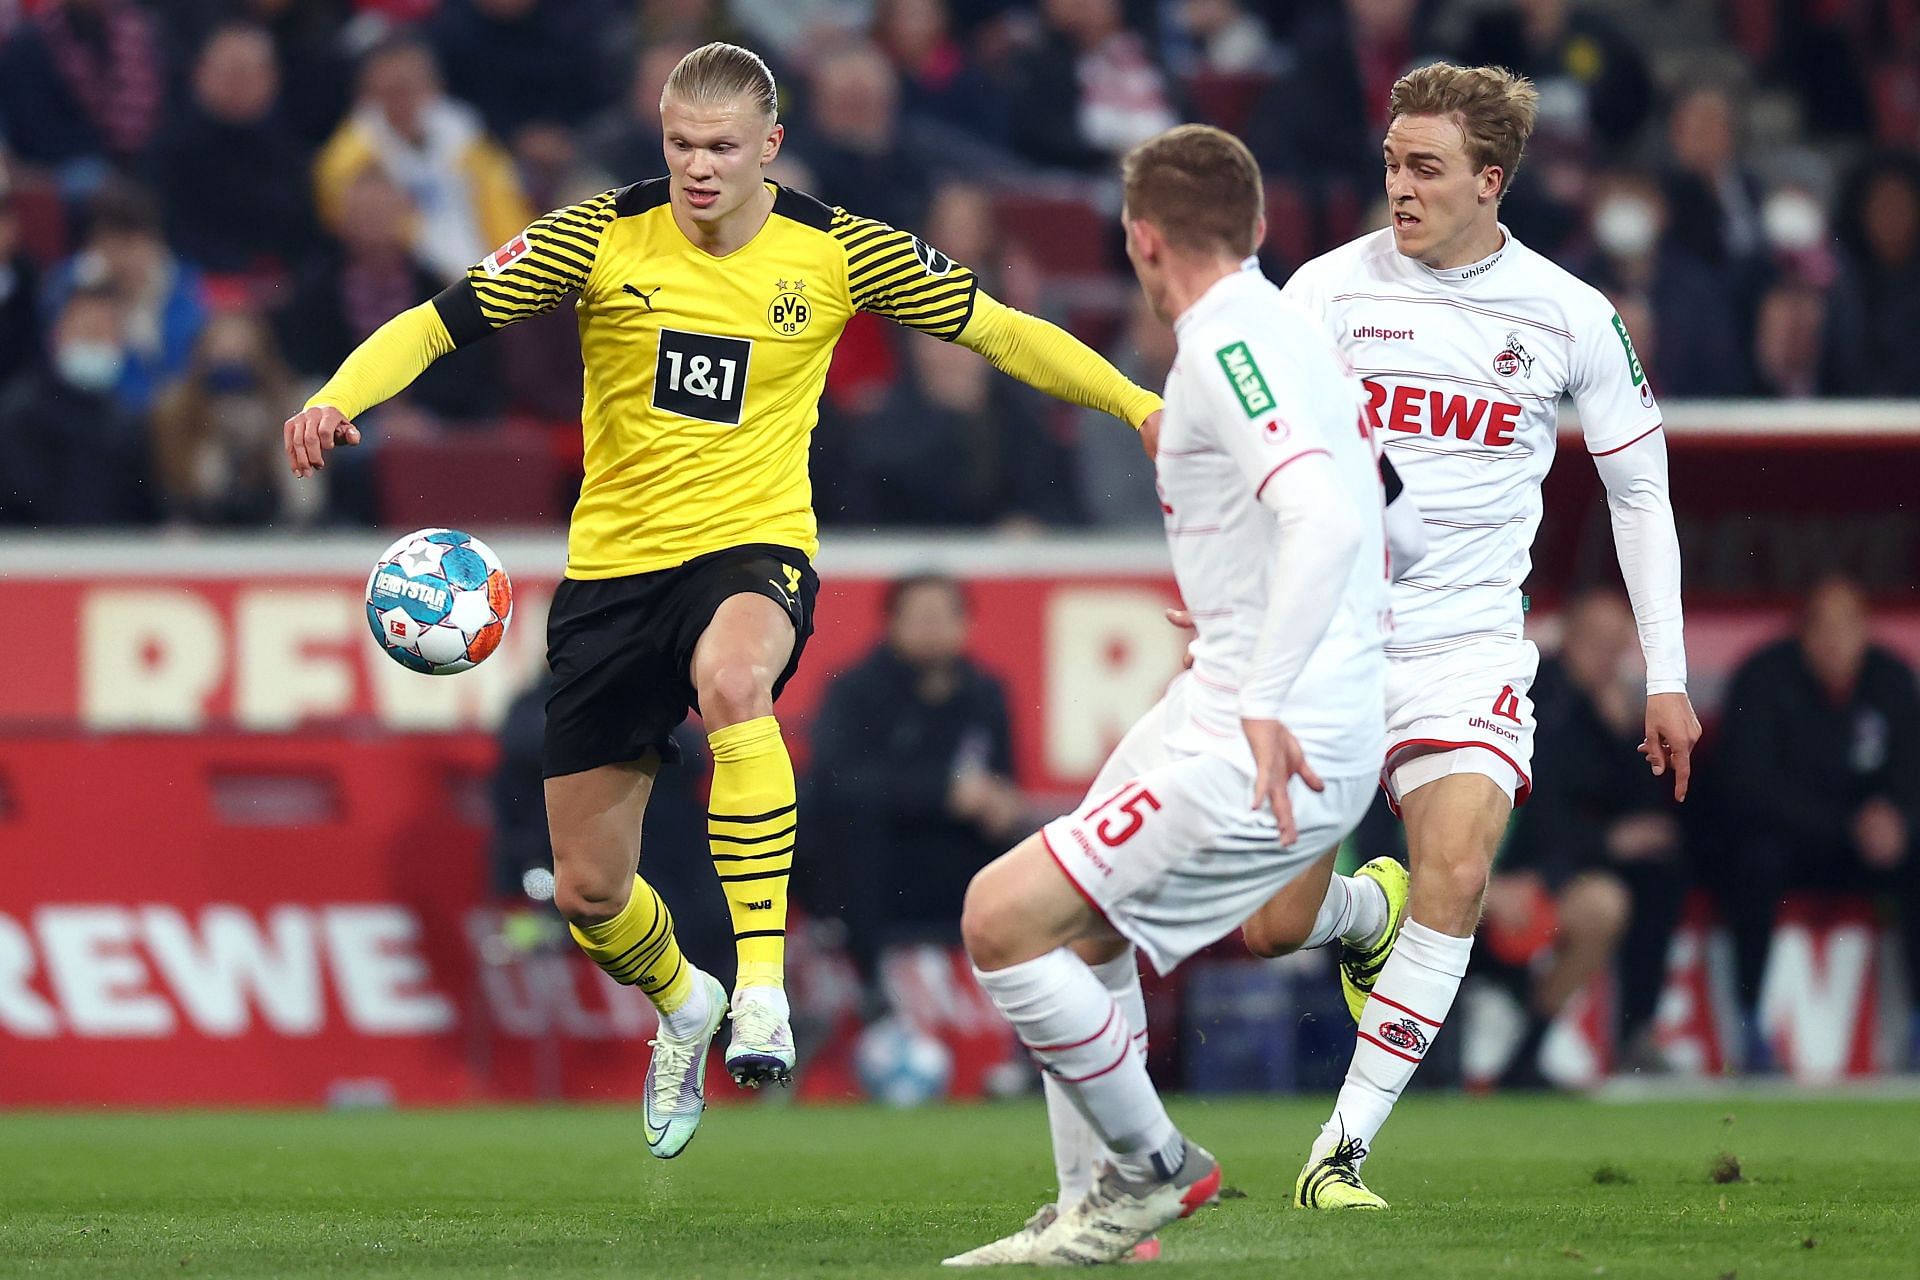 Erling Haaland (left) has been in red-hot form since joining Borussia Dortmund.